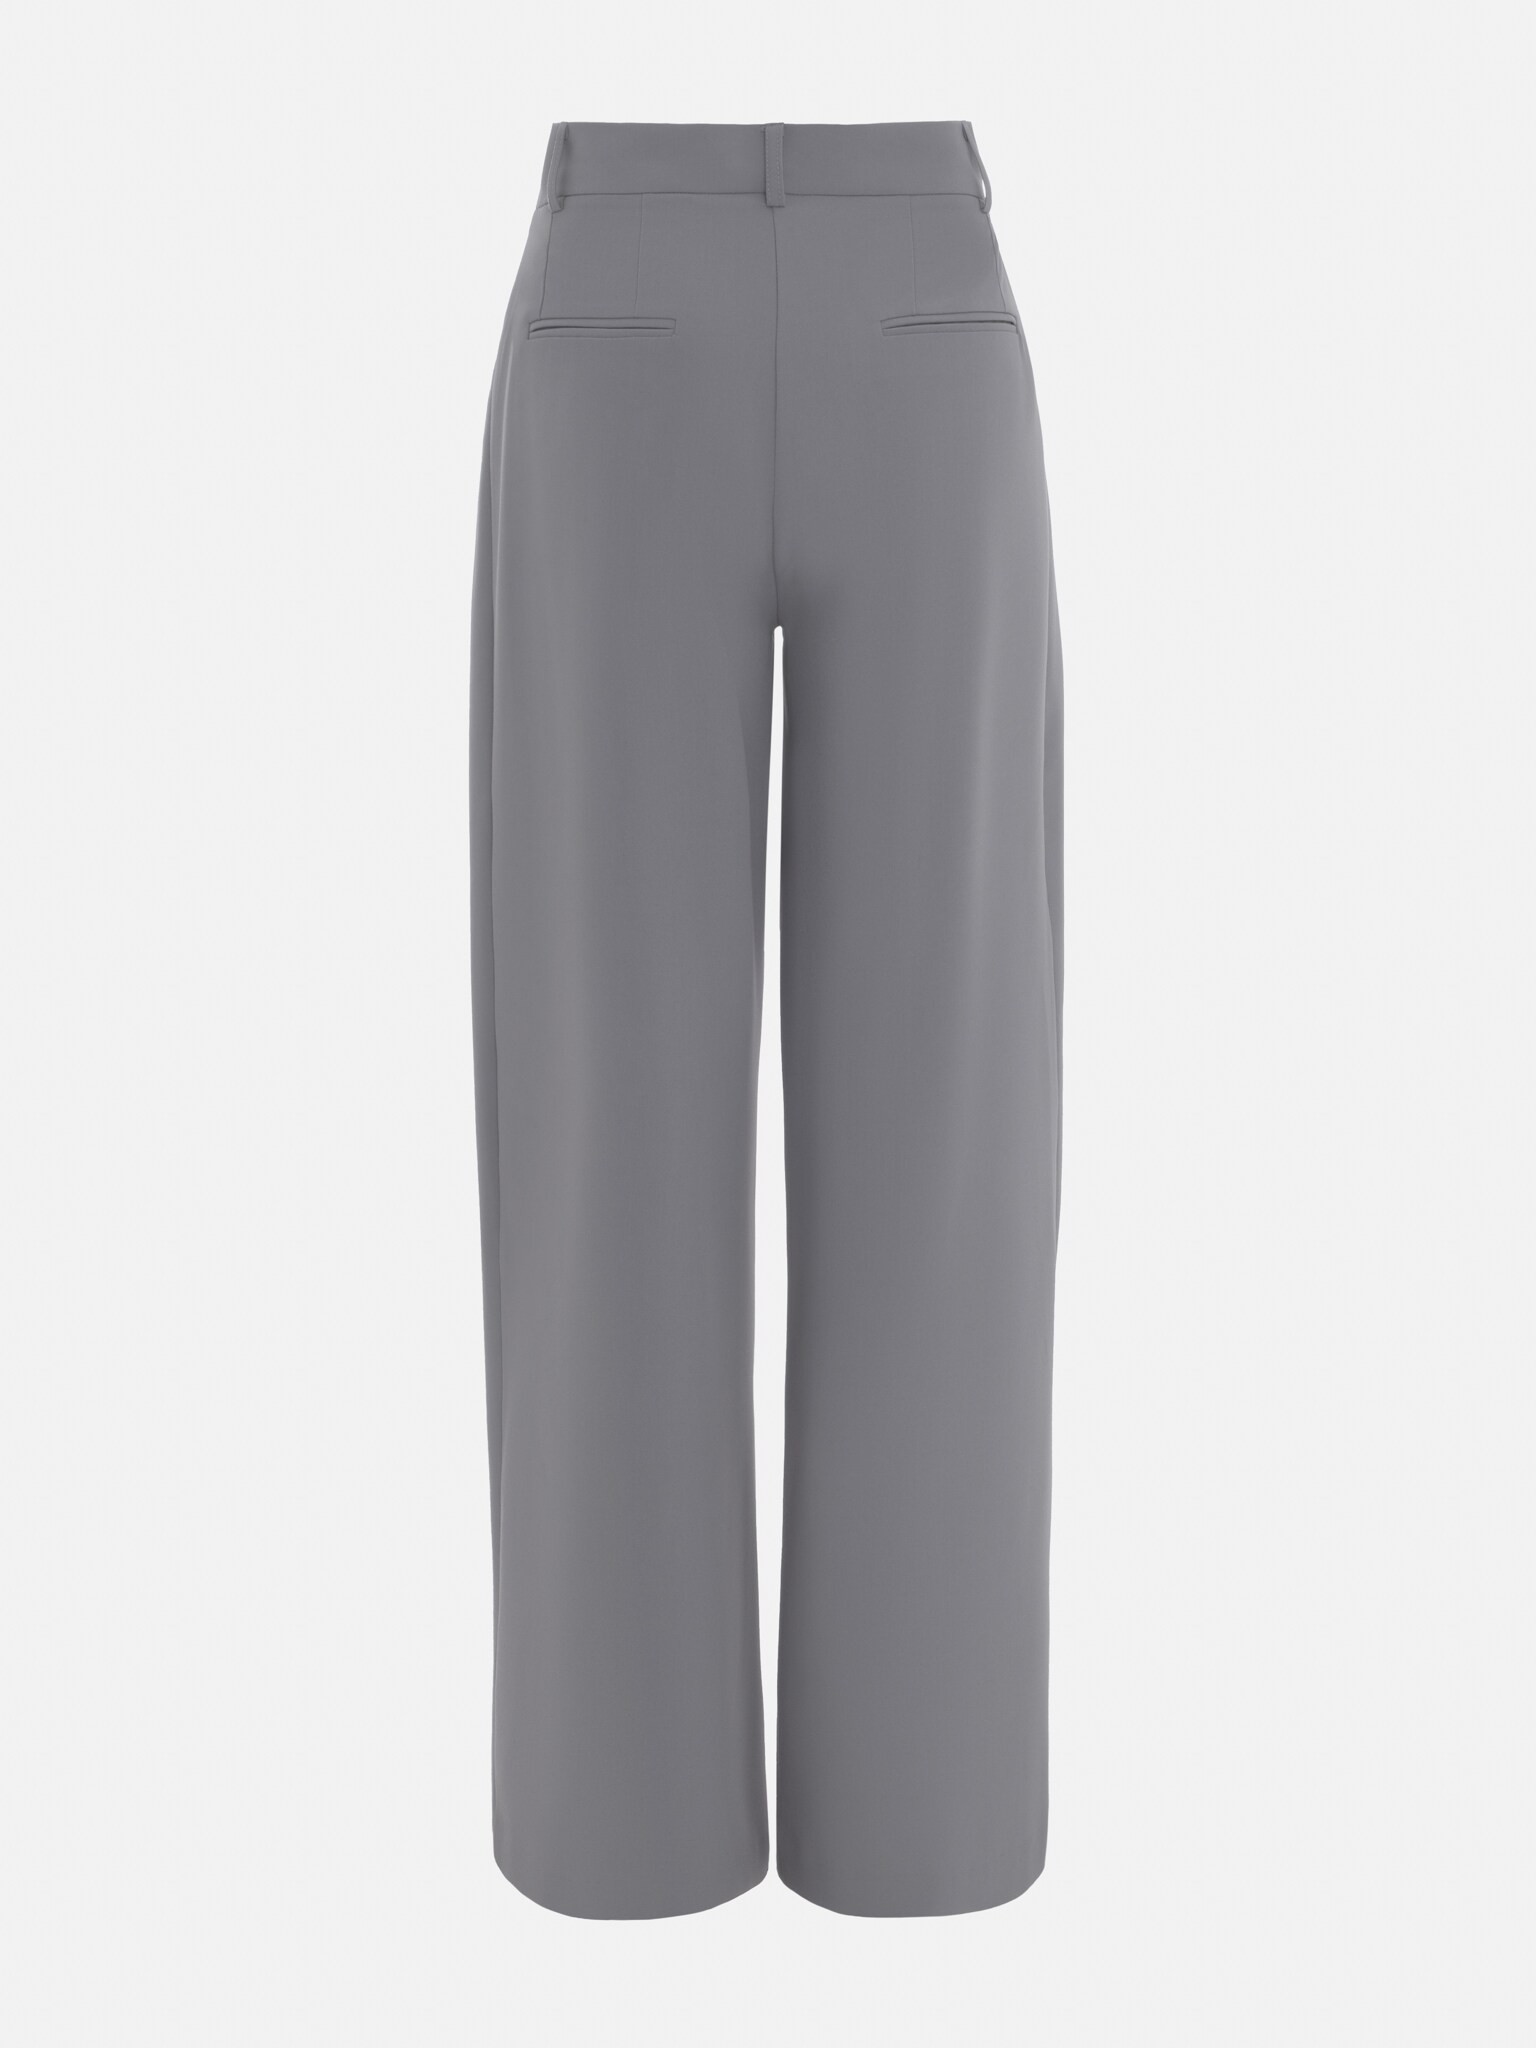 Buy Women's Pleated High Waisted Wide Leg Pants, Belted Palazzo Trousers,  Blue Loose Wide-legs Long Linen Pants, Womens Pants, Xiaolizi 2534 Online  in India 